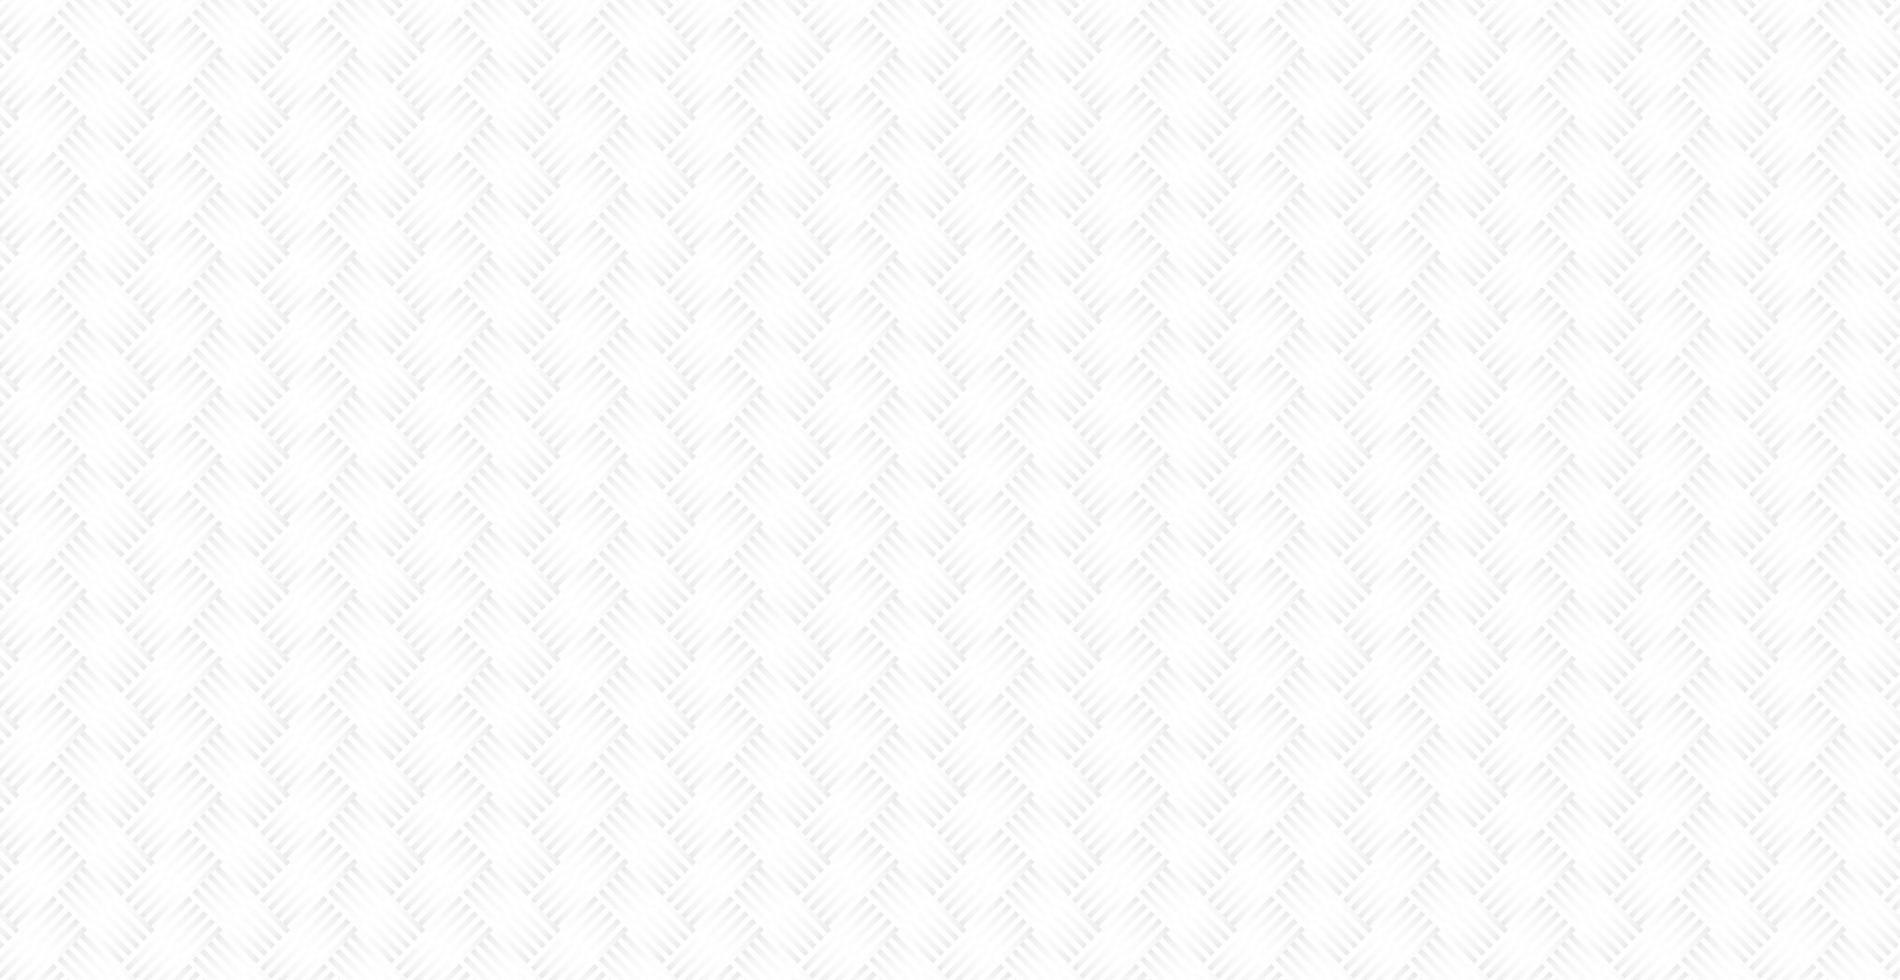 Panoramic white wicker background, repeating elements - Vector